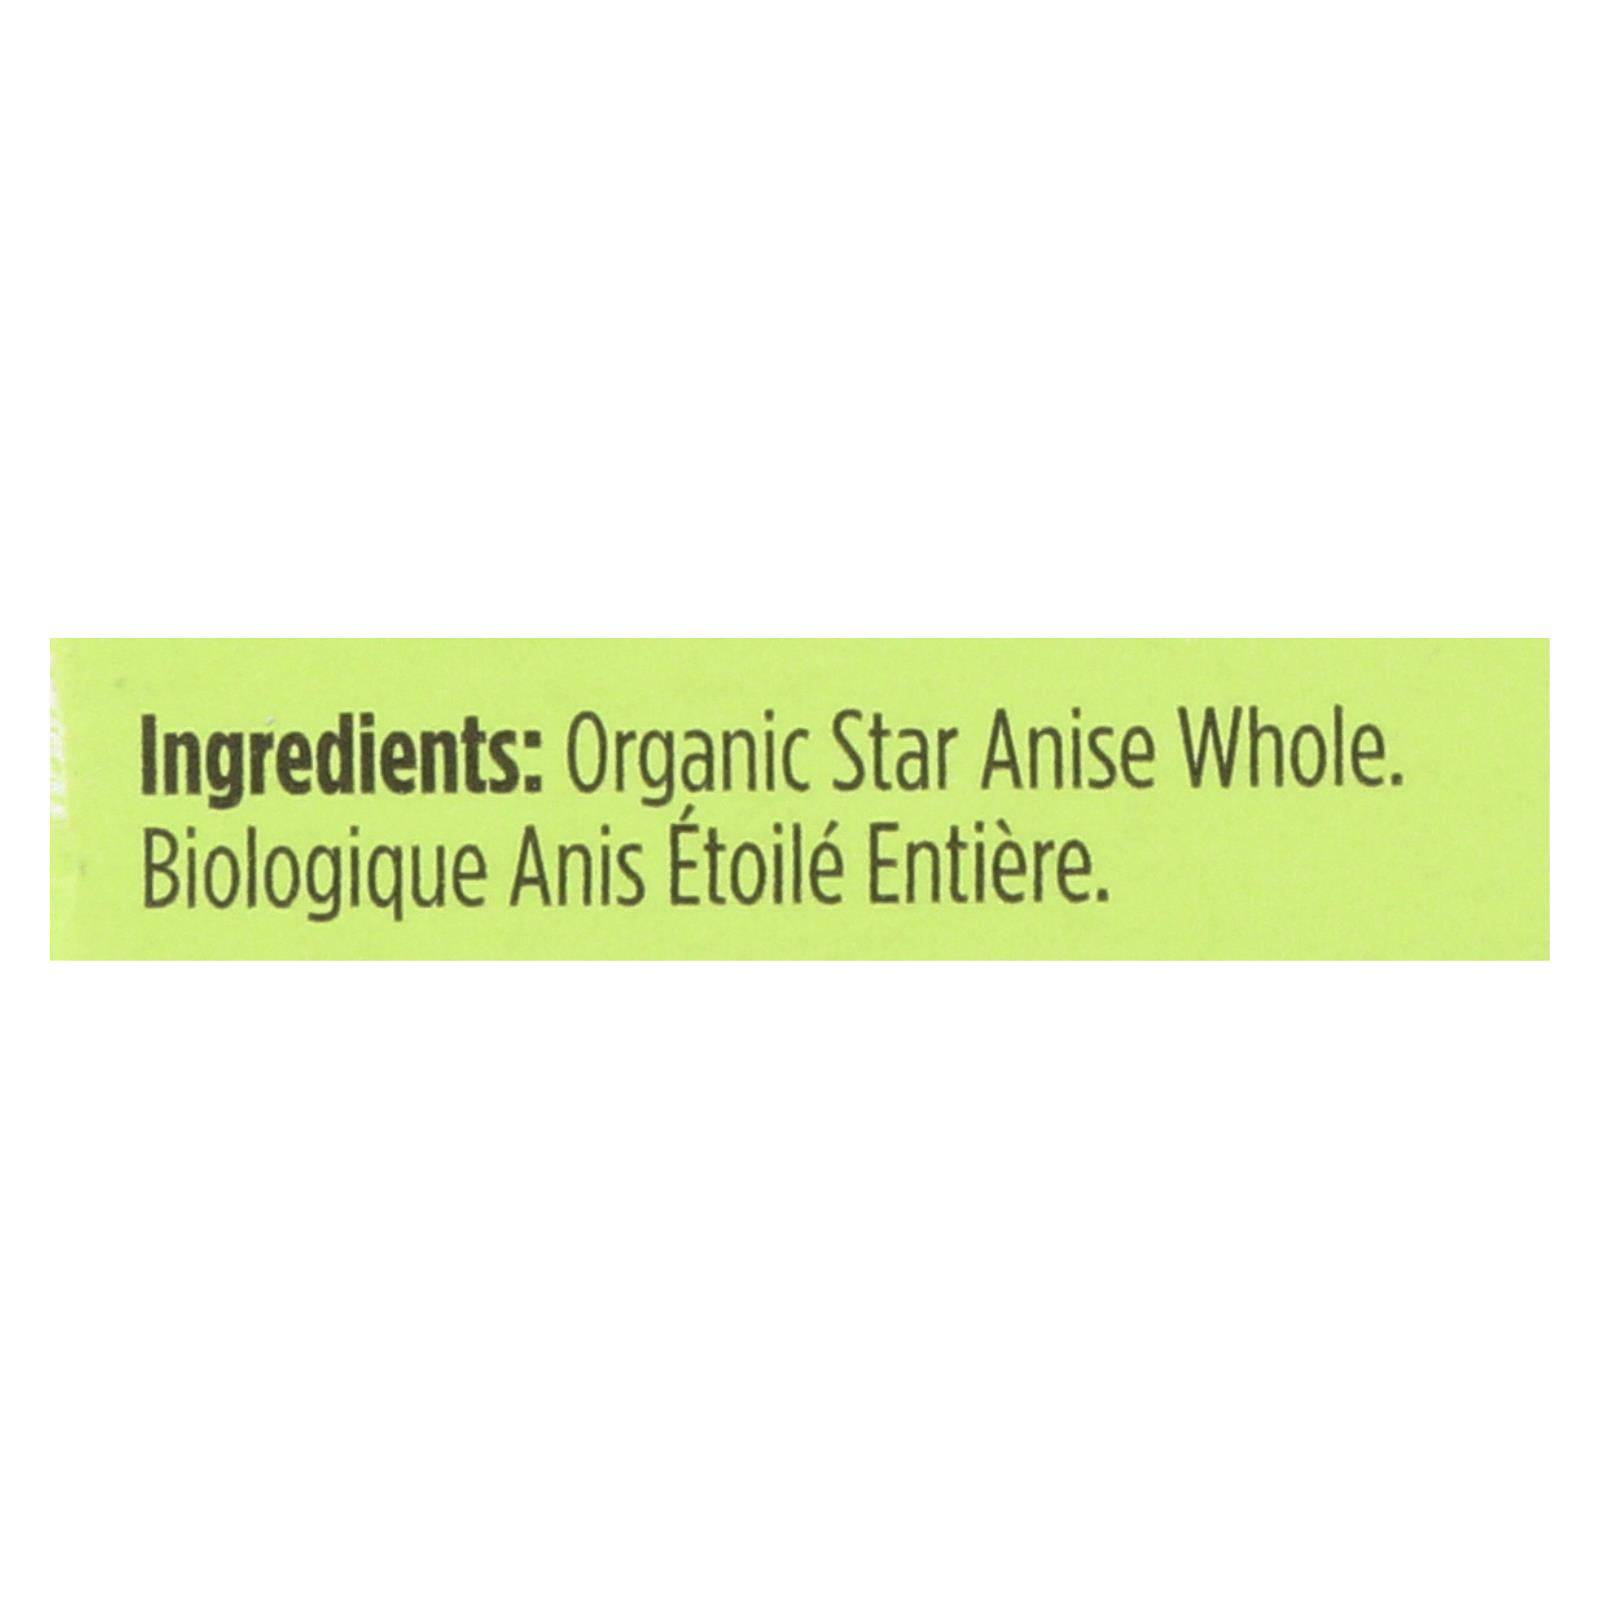 Spicely Organics - Organic Star Anise - Whole - Case Of 6 - 0.1 Oz. | OnlyNaturals.us